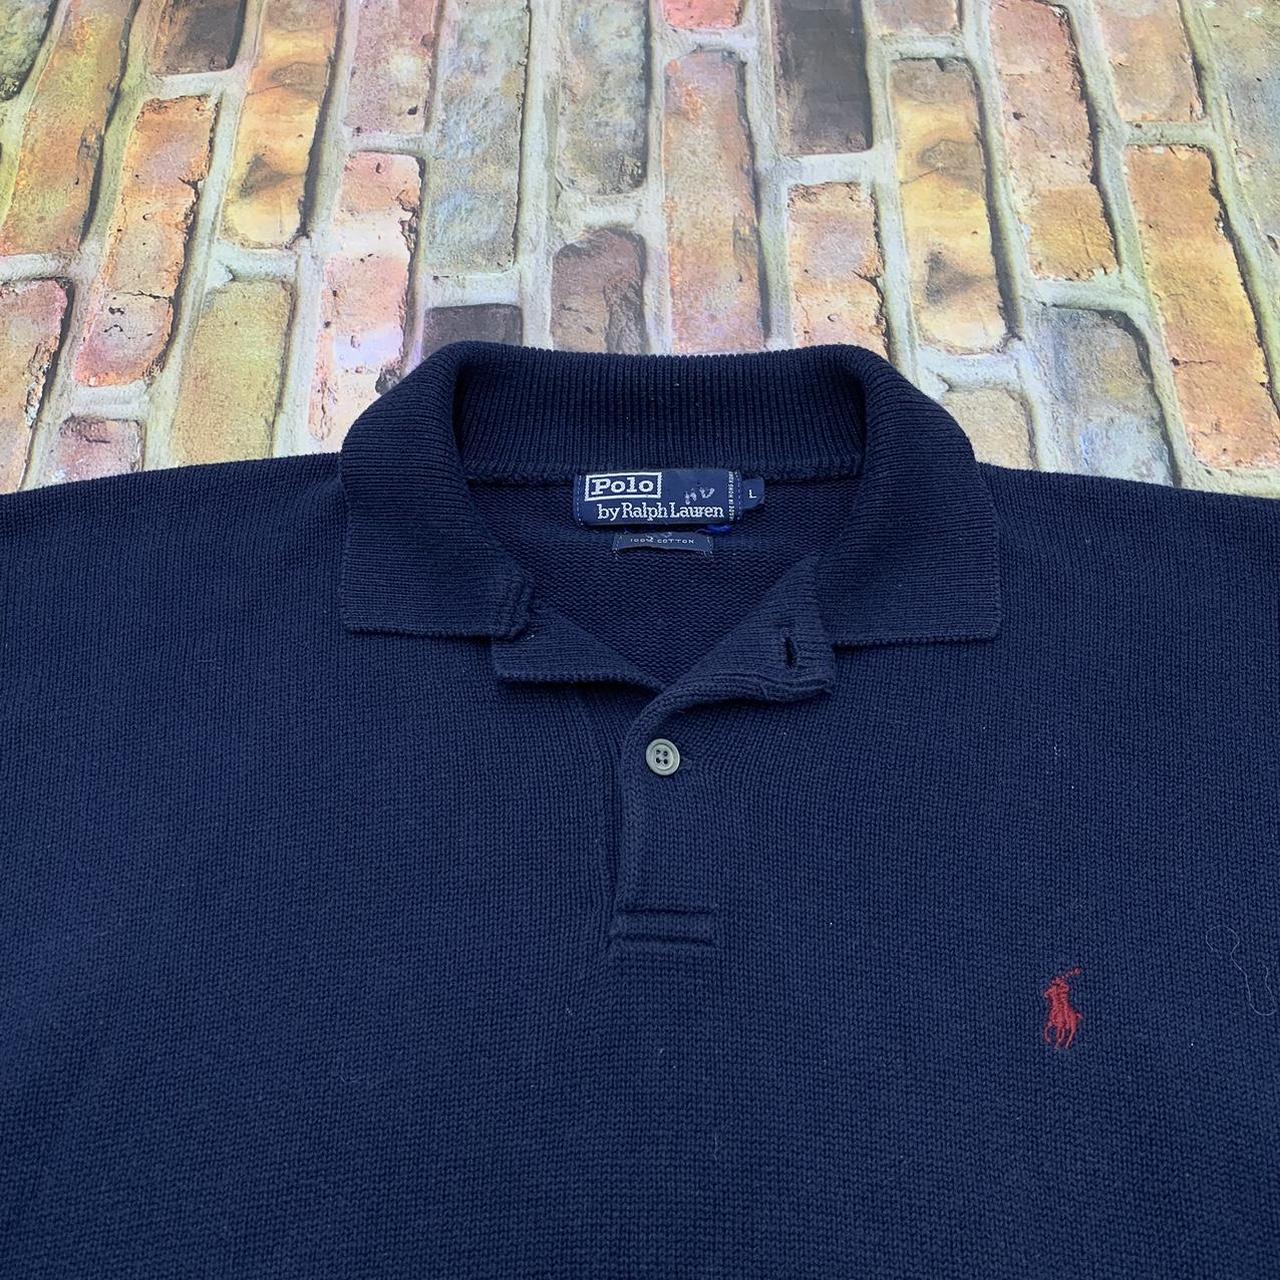 Vintage Polo sweater in navy. From the 90s. Mens L.... - Depop